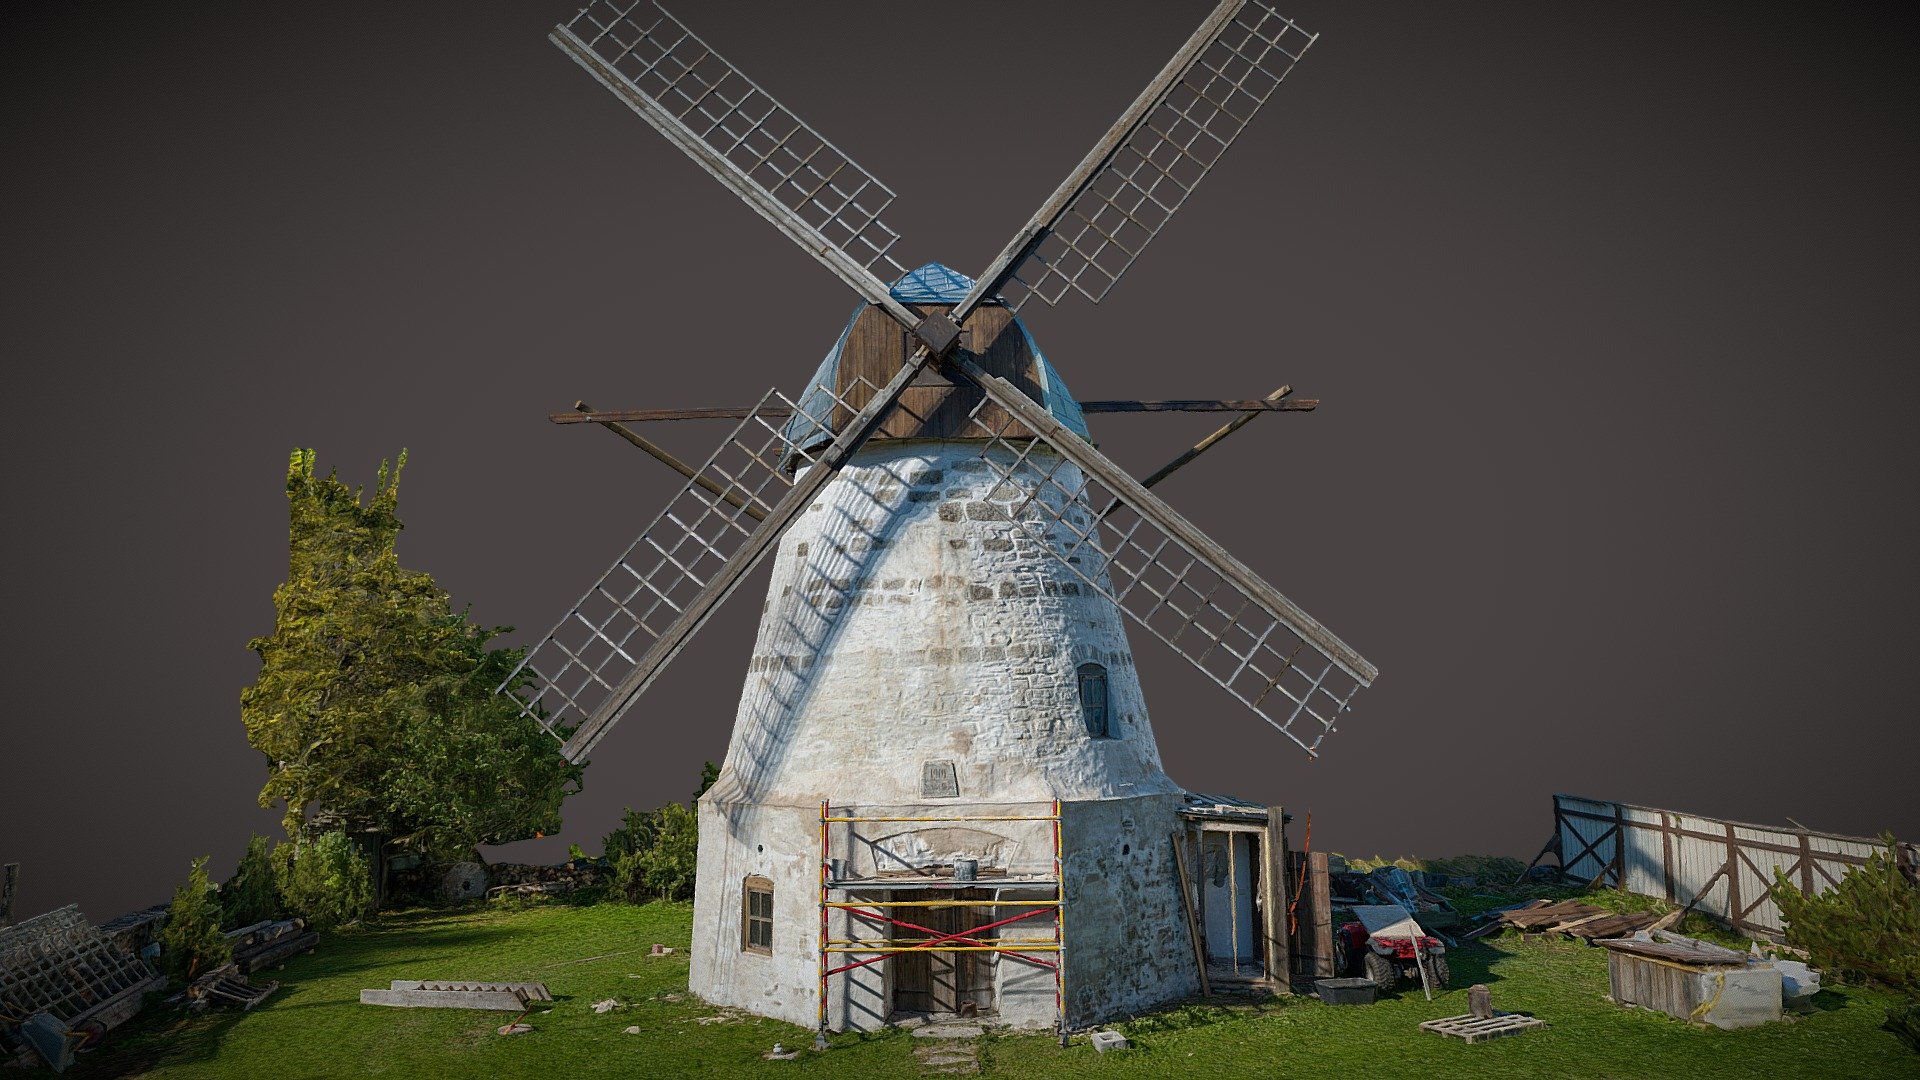 Sometime wide wings of windmills decorated and dominated the landscape. Standing away from the settlements, they looked lonely but powerful, welcoming the wind with all their might.

Kõrtsi windmill Lat: 58.328565 Long: 22.382085 Estonia

Photogrammetry reconstruction in RealityCapture from 345 images. © Saulius Zaura www.dronepartner.lt 2022 - Kõrtsi Windmill - 3D model by Saulius.Zaura 3d model